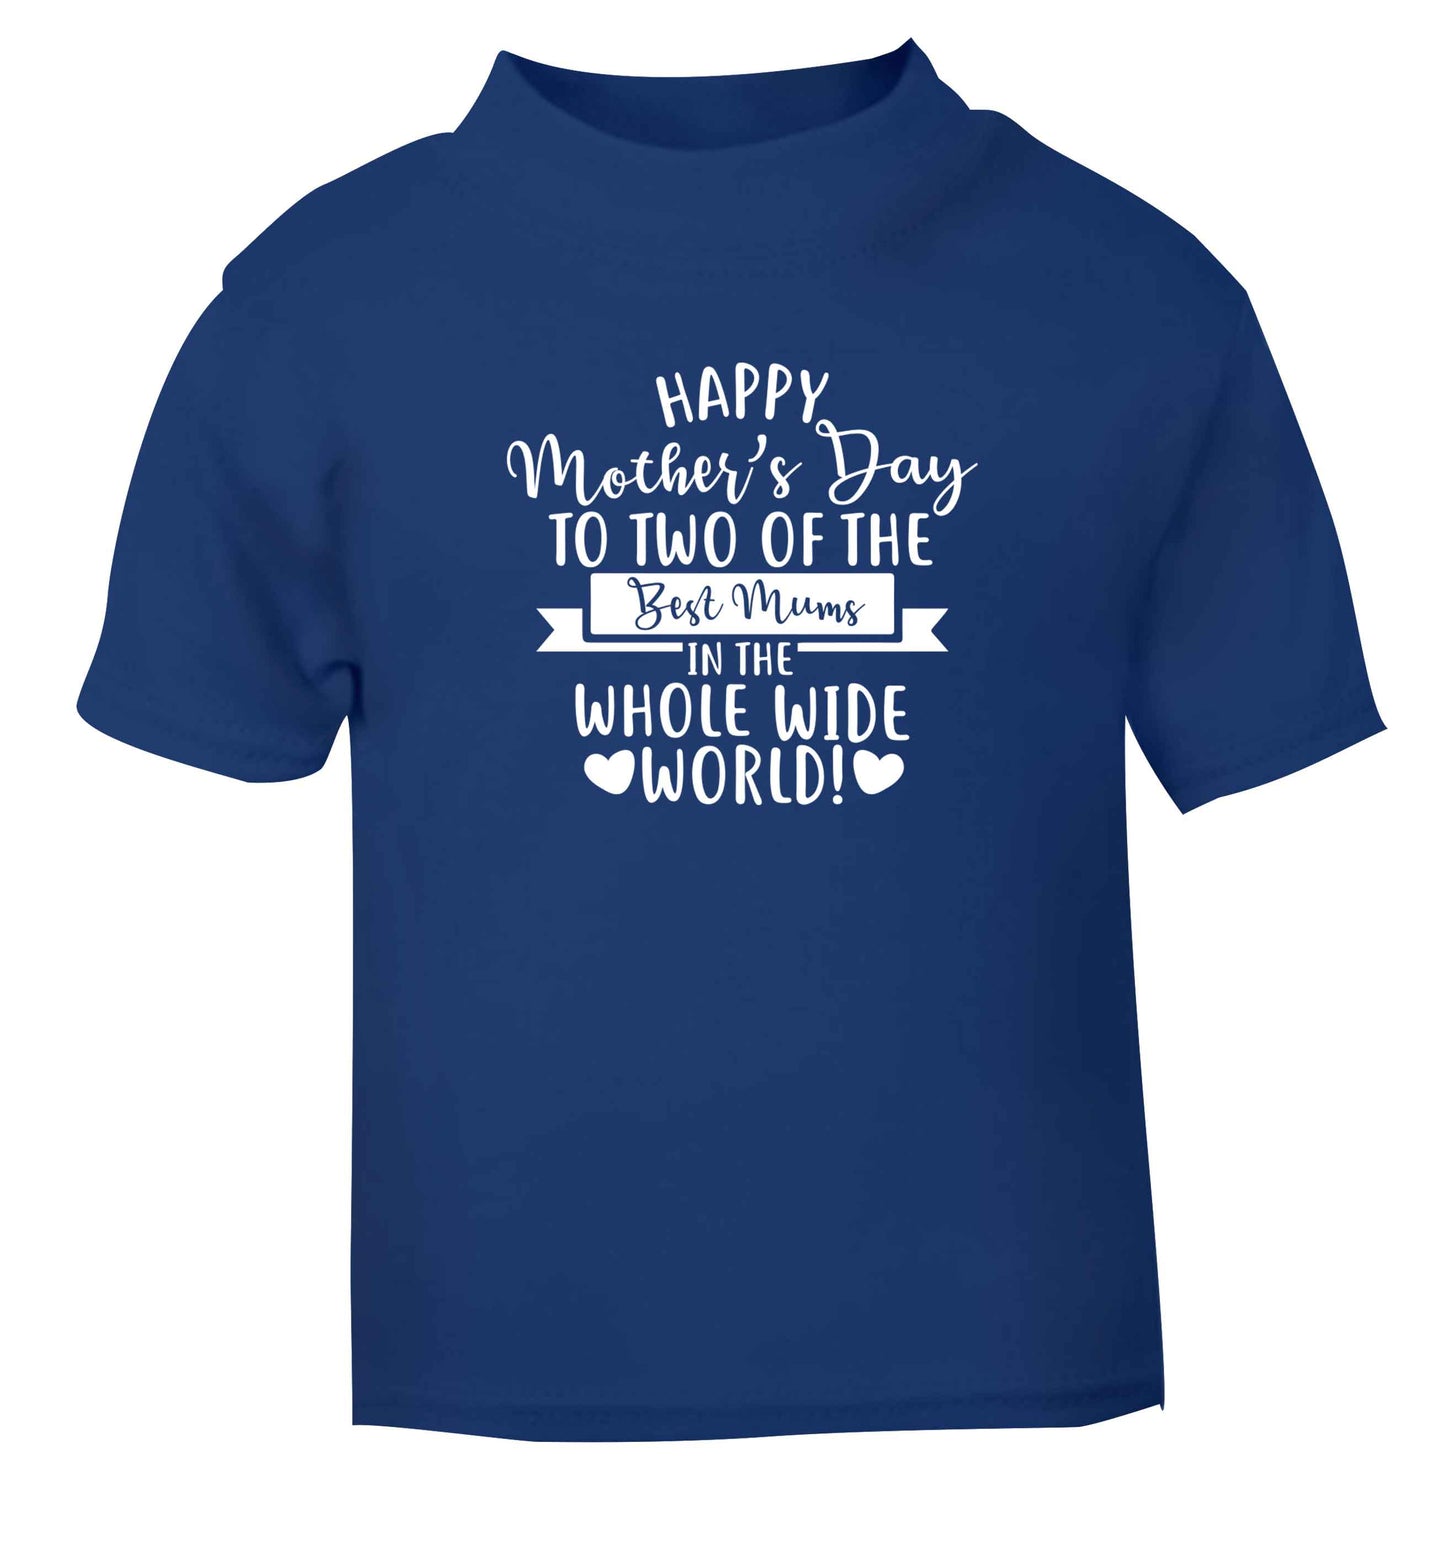 Happy mother's day to two of the best mums in the whole wide world blue baby toddler Tshirt 2 Years